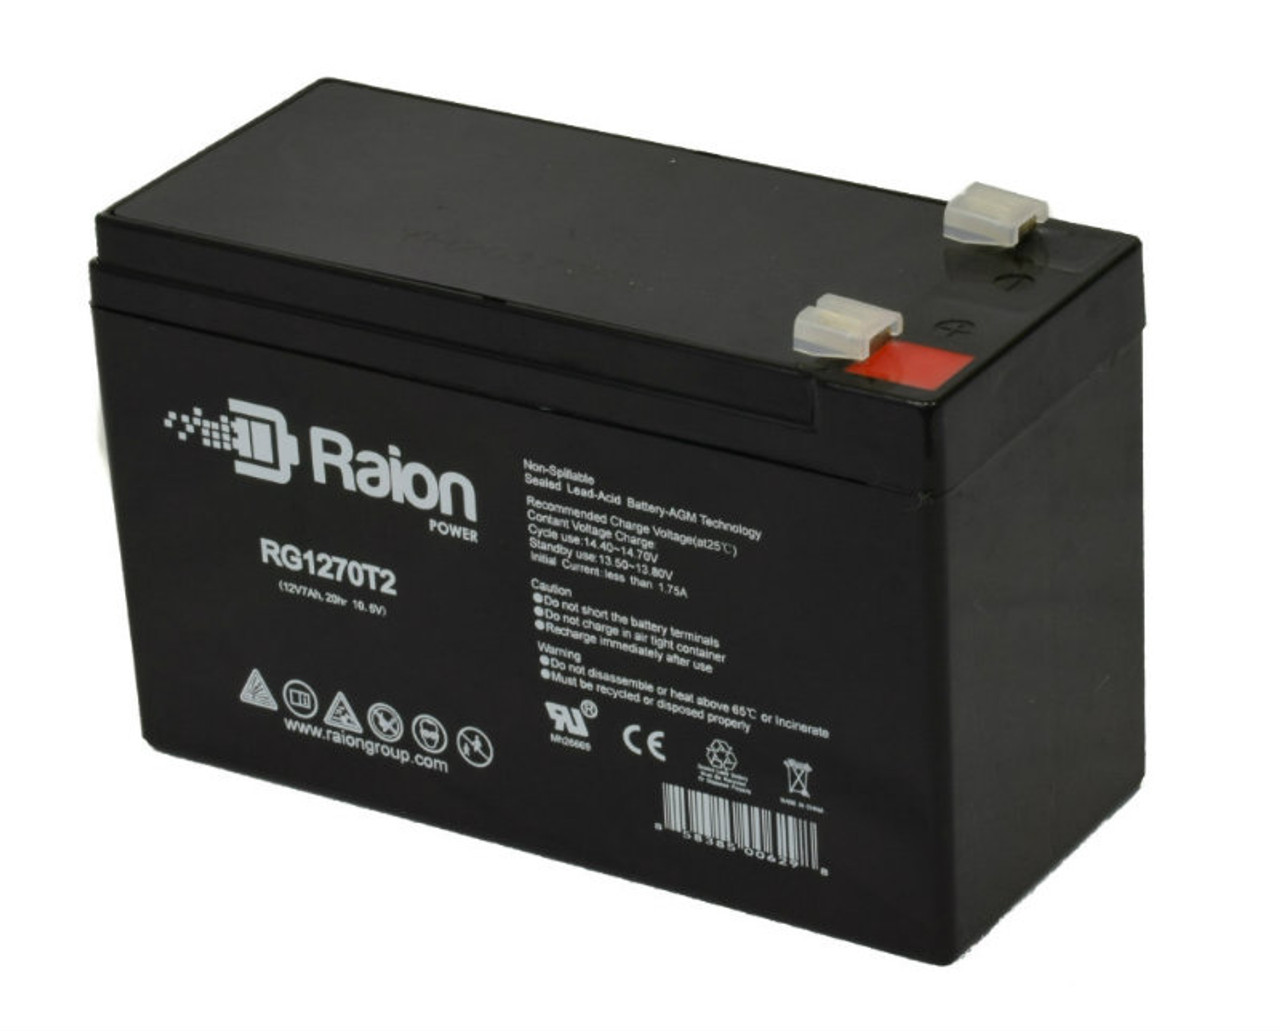 Raion Power Replacement RG1270T1 Battery for Savaria SL-1000 Stairlift